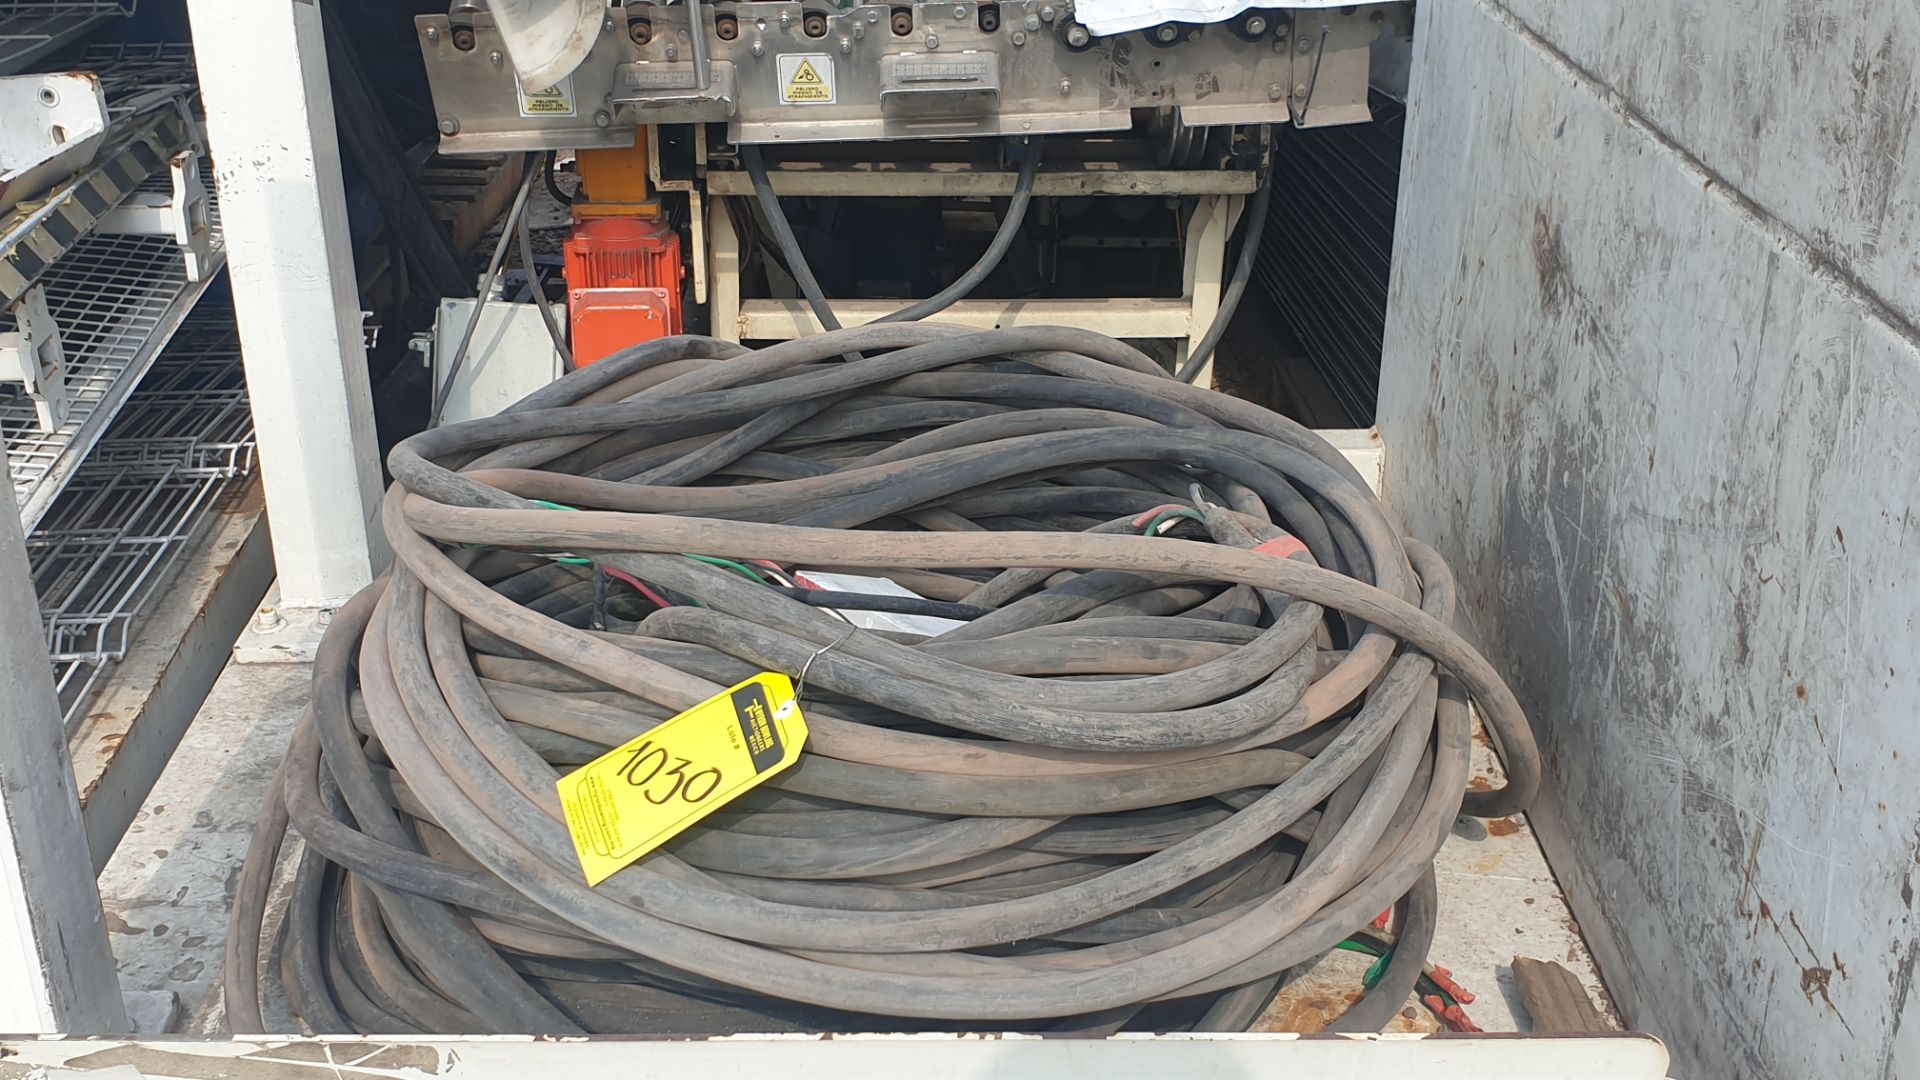 Lot of cable for high tension of 3 lines different gauge 80 mts approximately